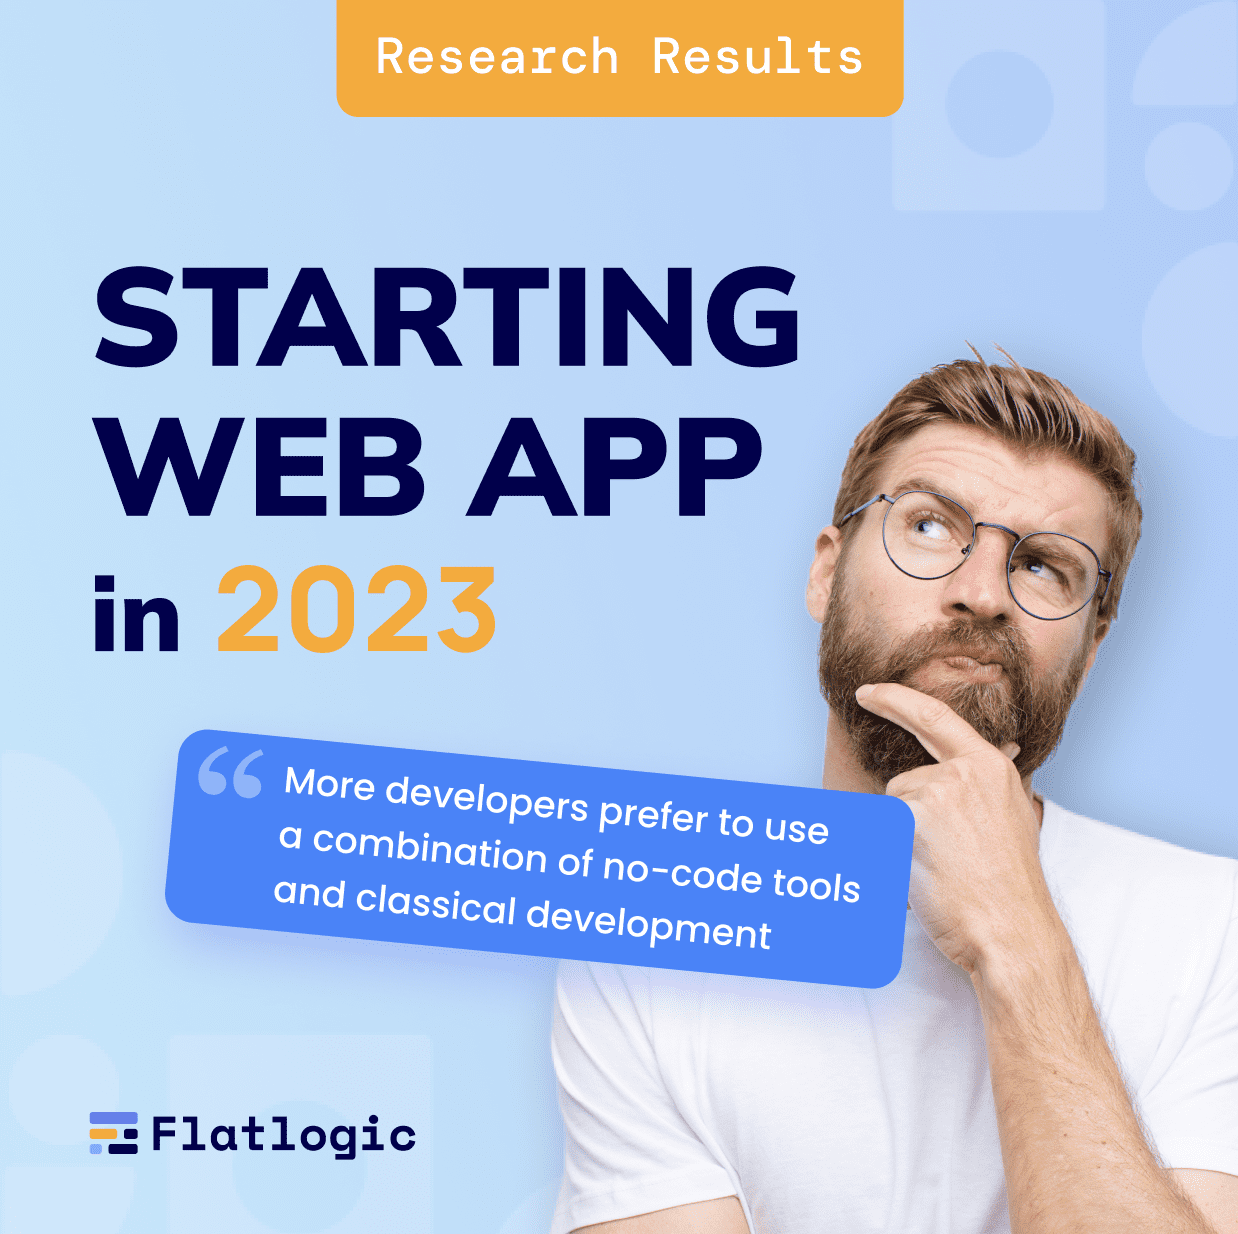 [Research Results] Starting Web App in 2023